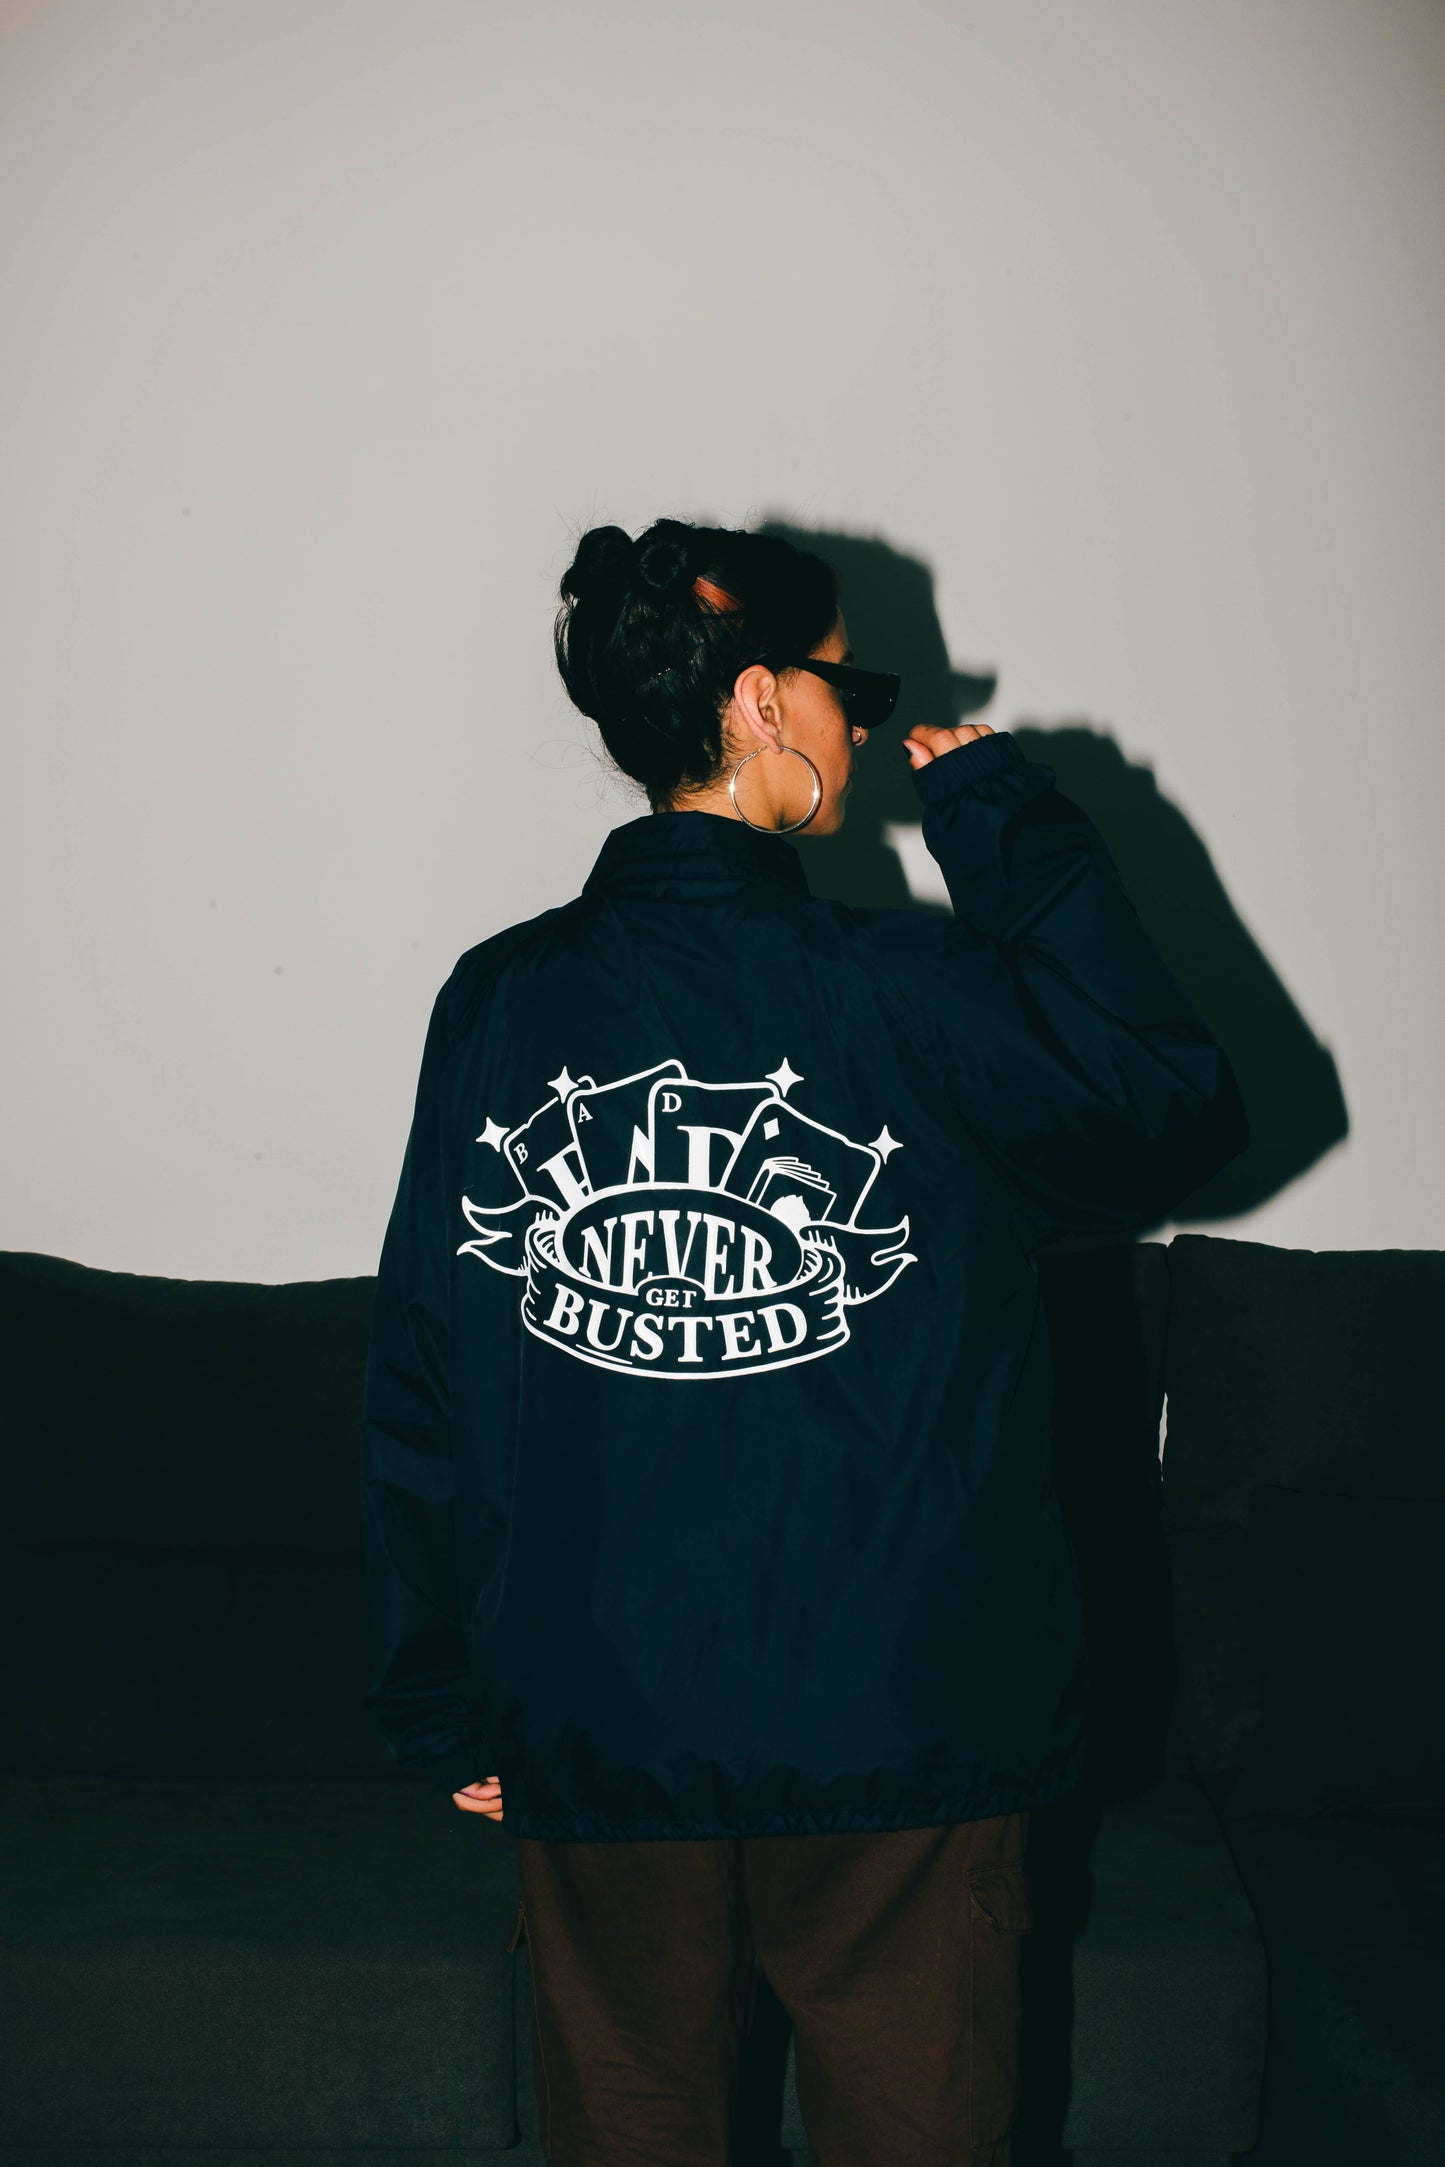 Coach jacket " NEVER GET BUSTED "